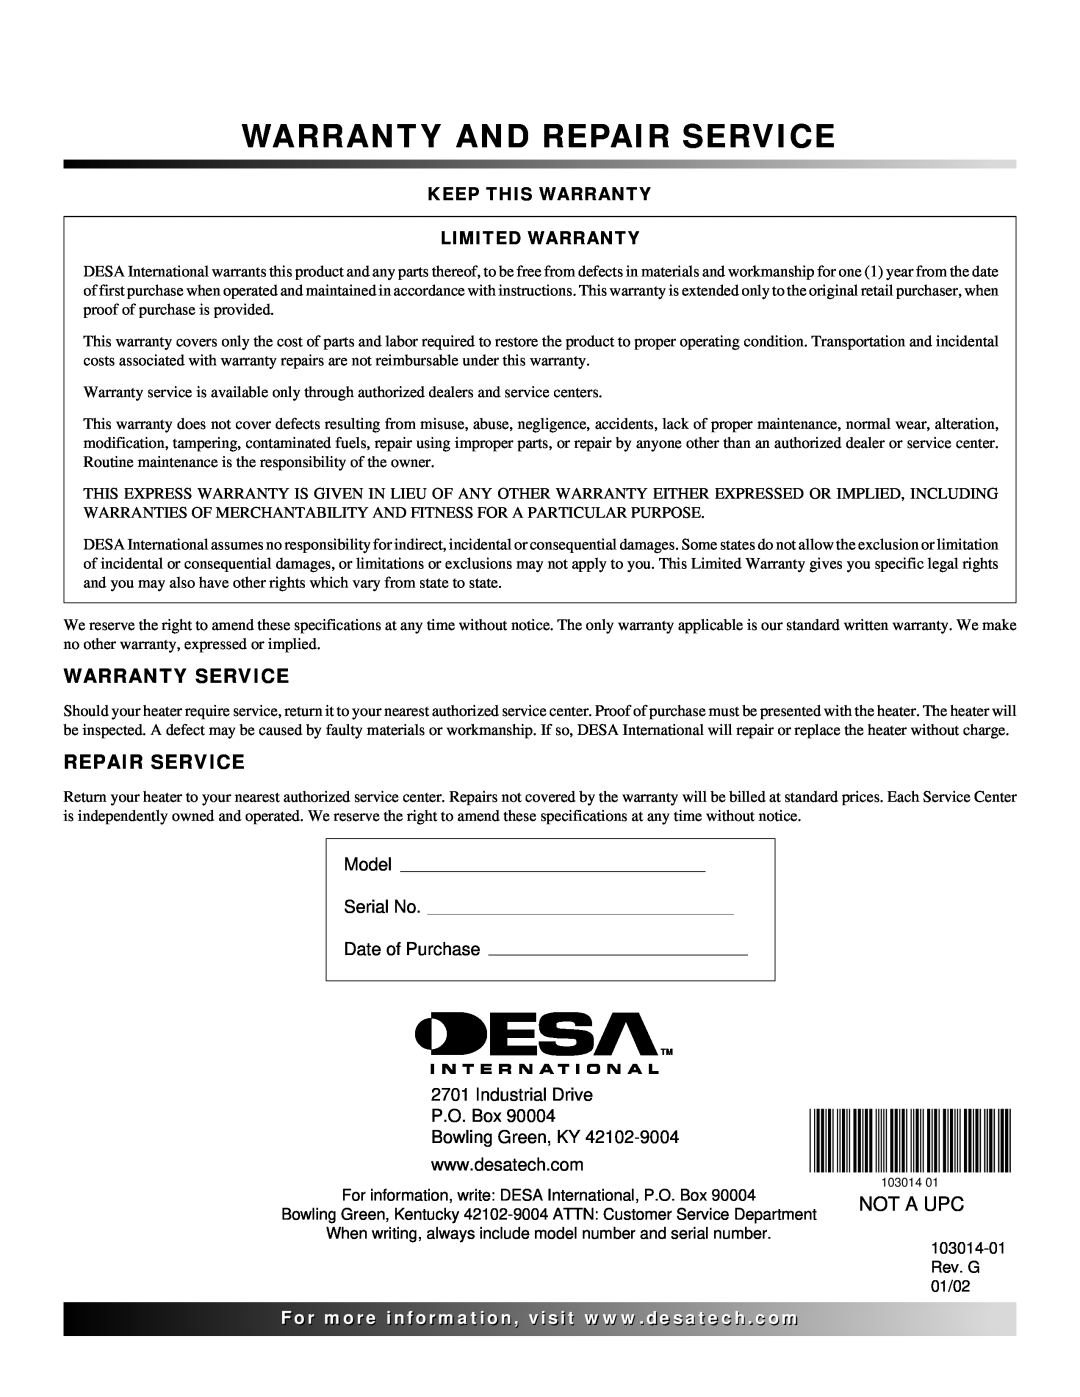 Desa LP155AT owner manual Warranty And Repair Service, Warranty Service, Not A Upc, Keep This Warranty Limited Warranty 